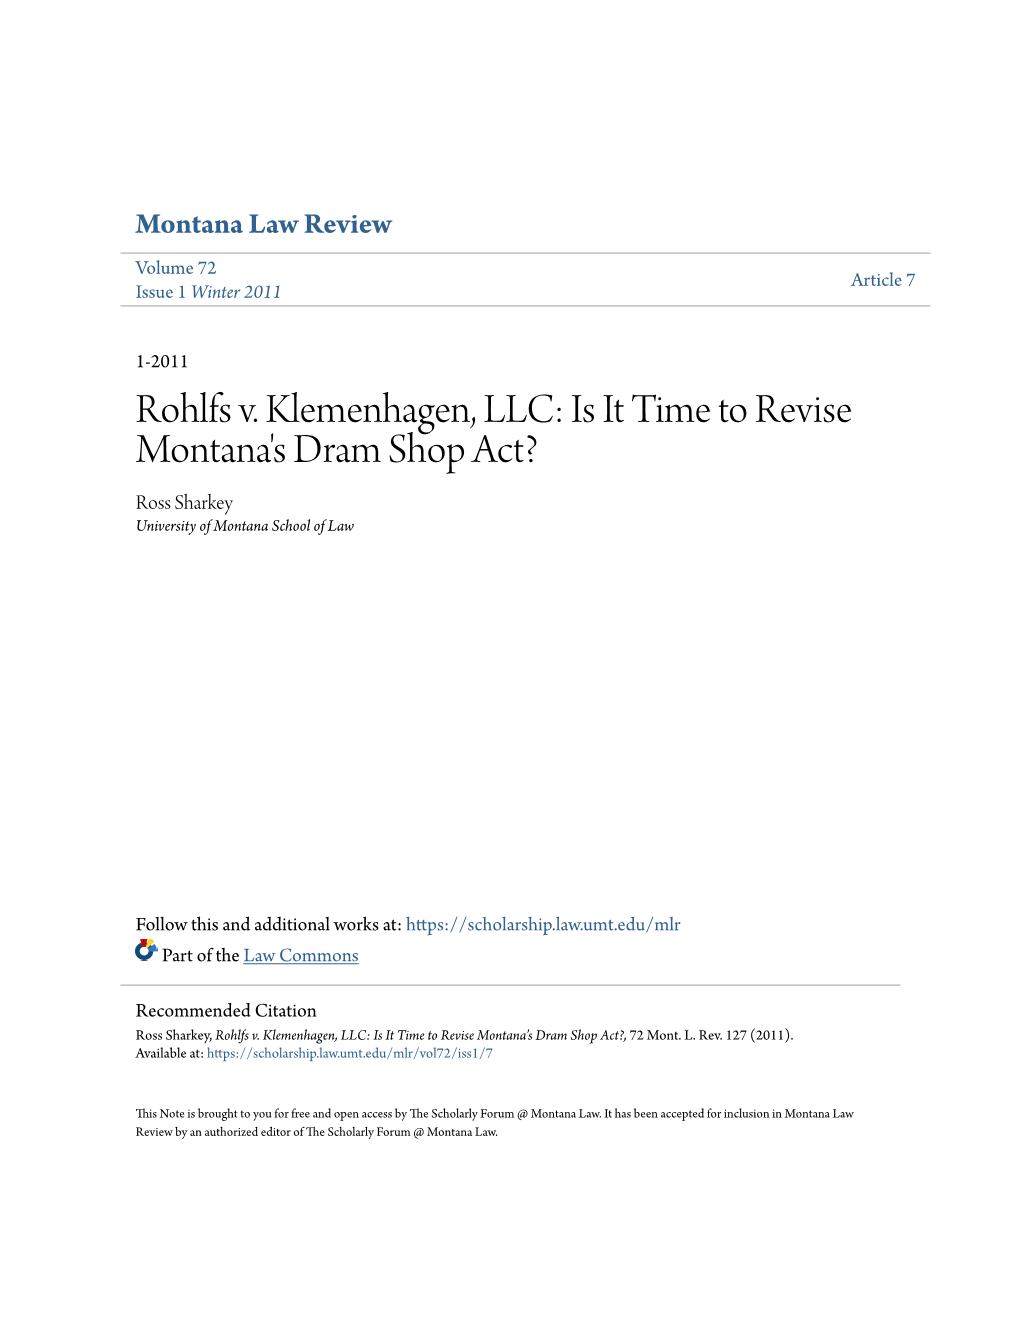 Is It Time to Revise Montana's Dram Shop Act? Ross Sharkey University of Montana School of Law